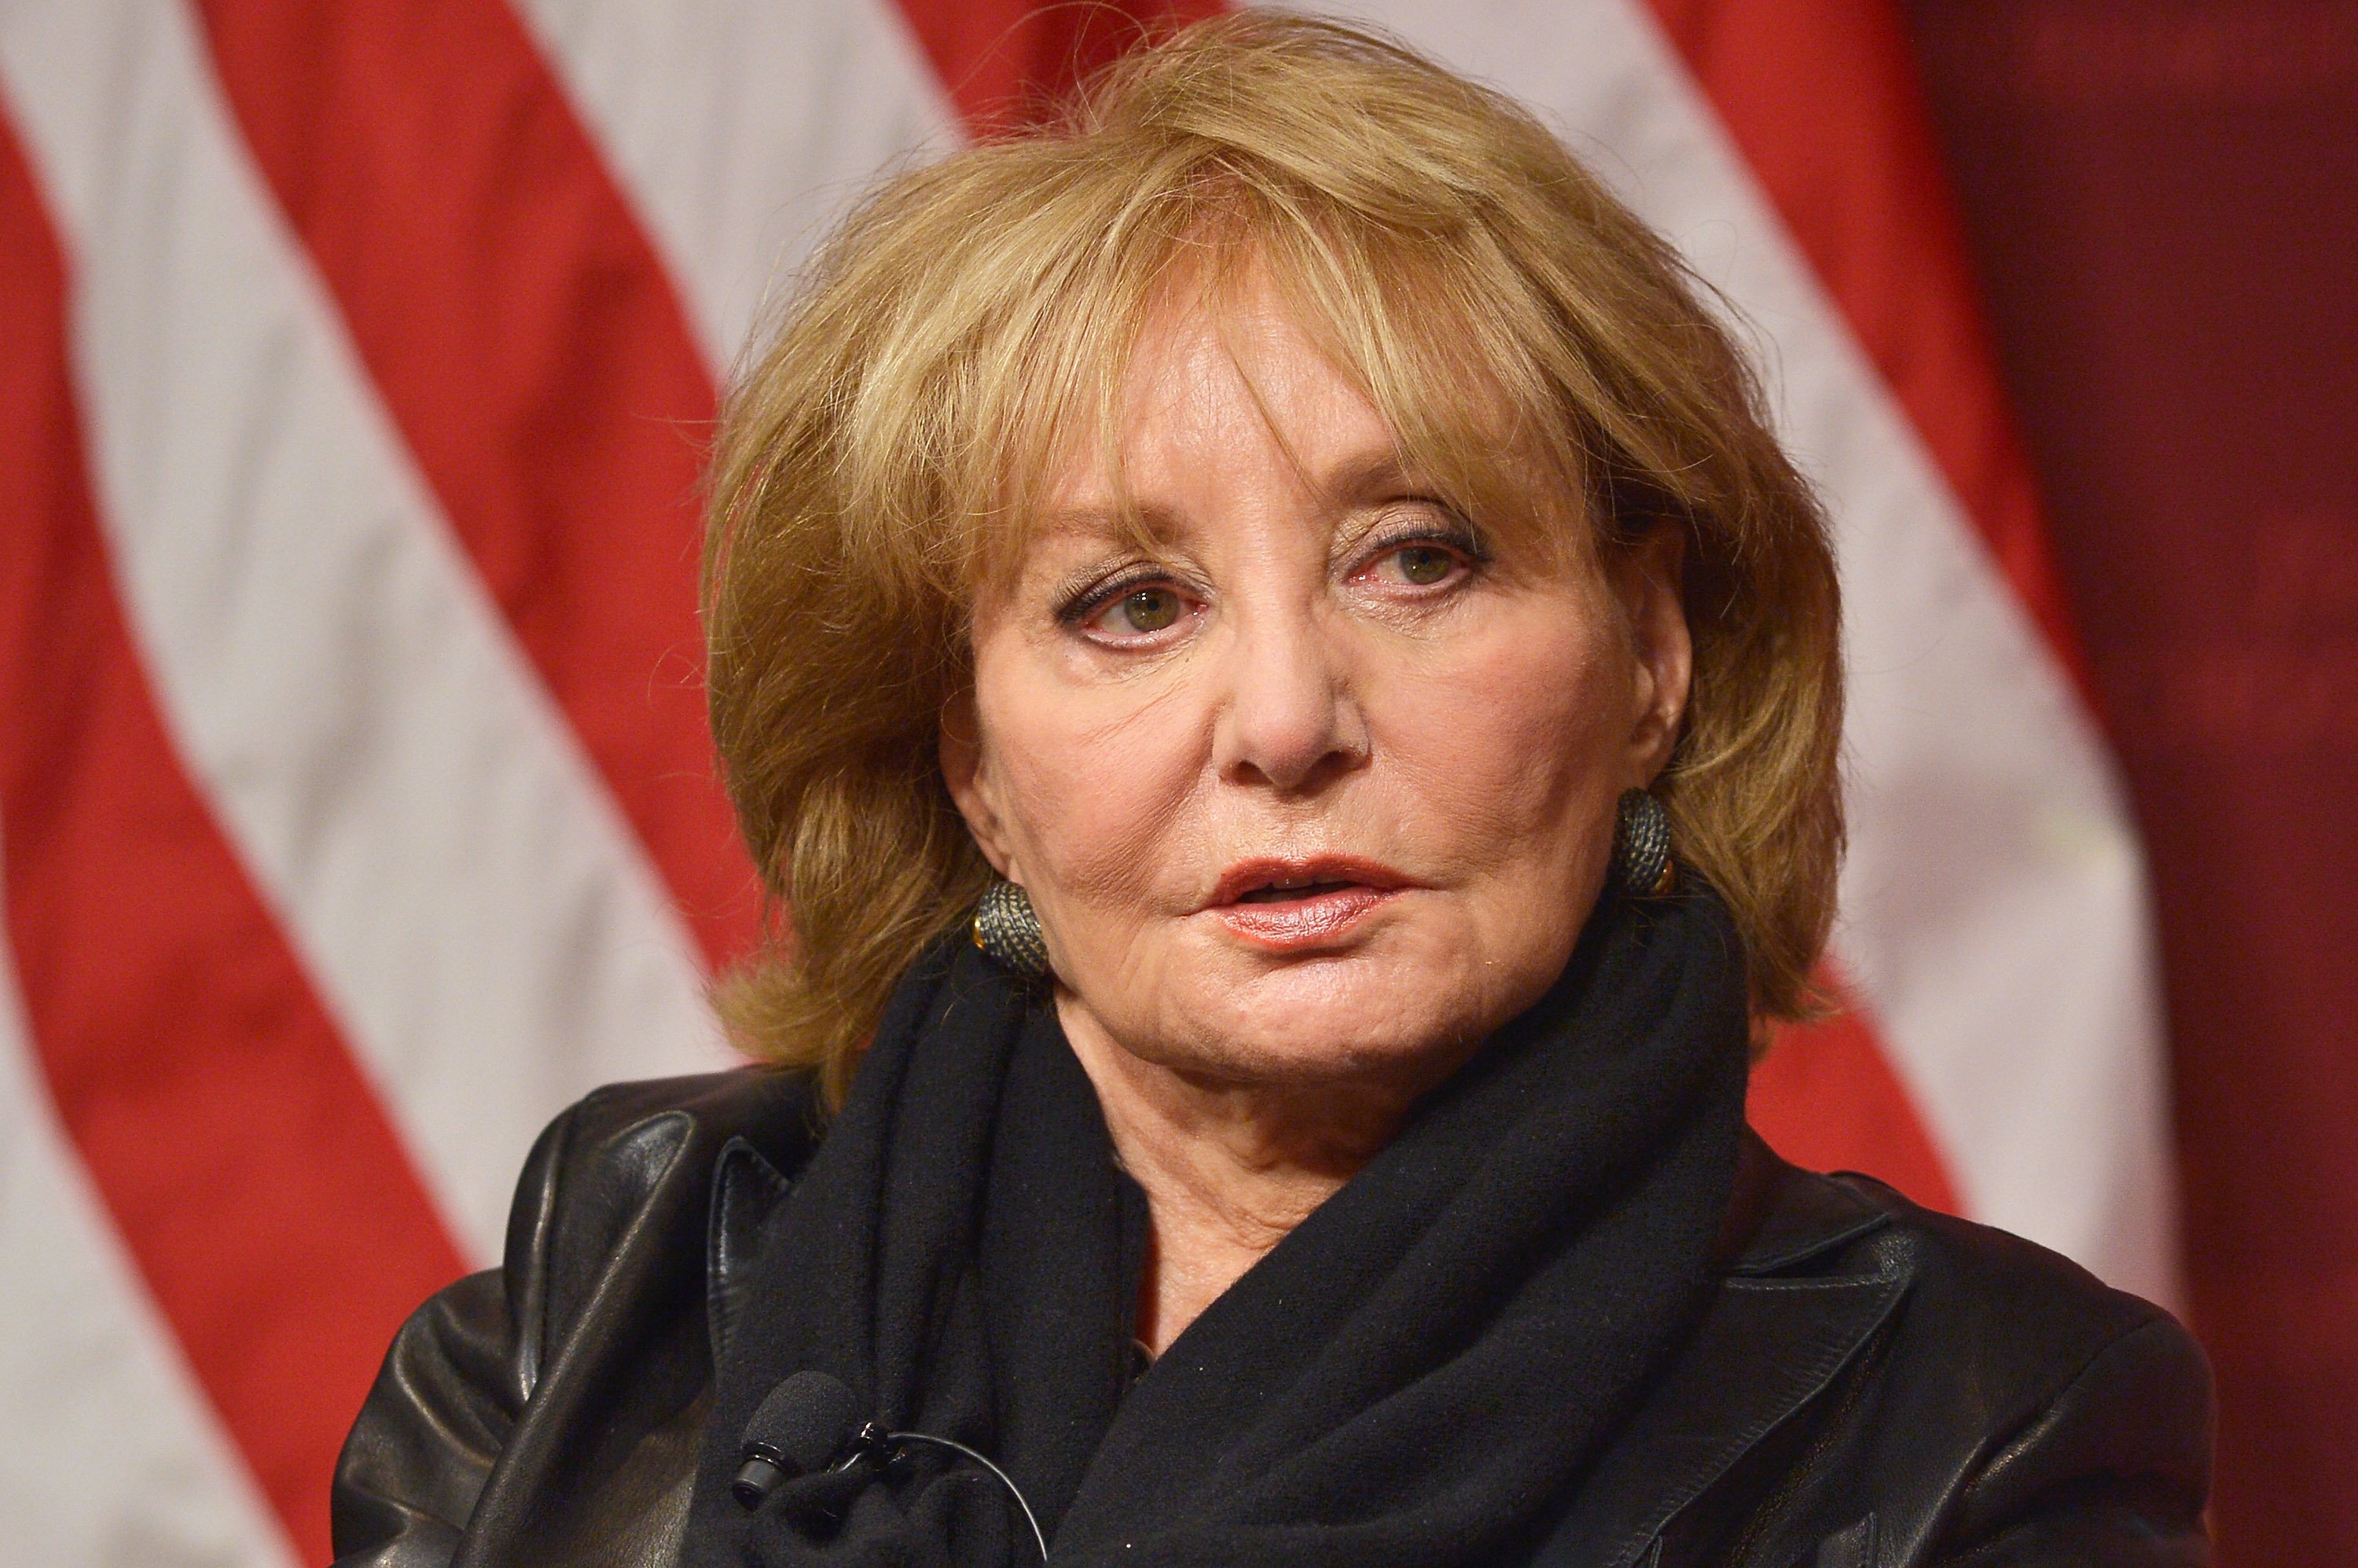 Barbara Walters speaks at the The John F. Kennedy Jr. Forum presents An Evening with Barbara Walters at Harvard University on October 7, 2014 | Source: Getty Images